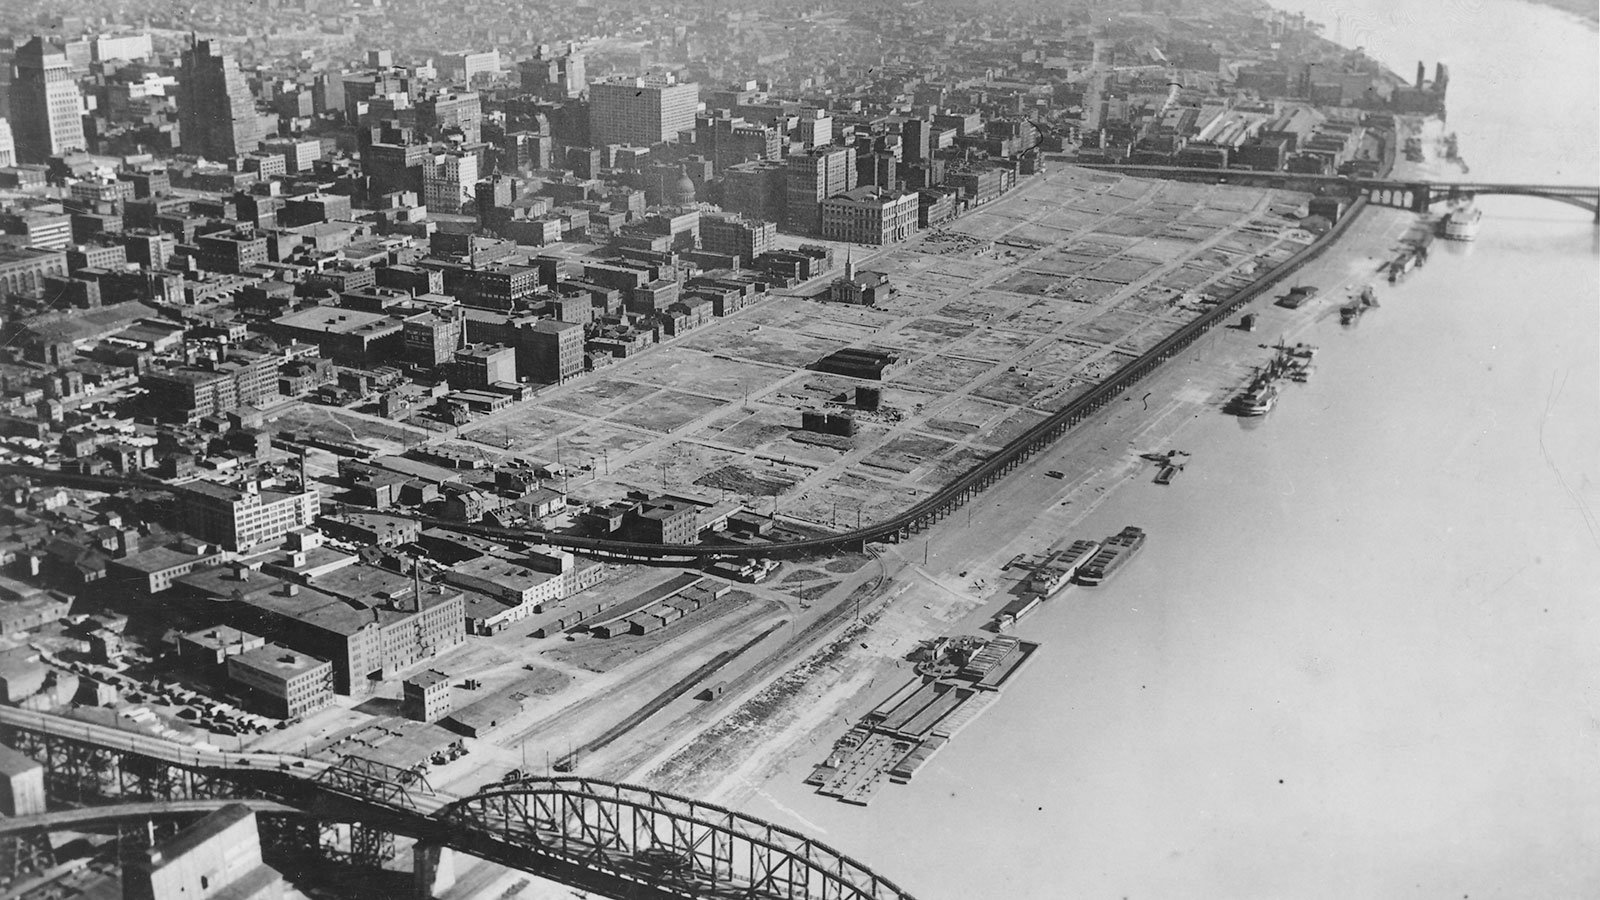 The St. Louis riverfront after demolition of warehouses, circa 1942